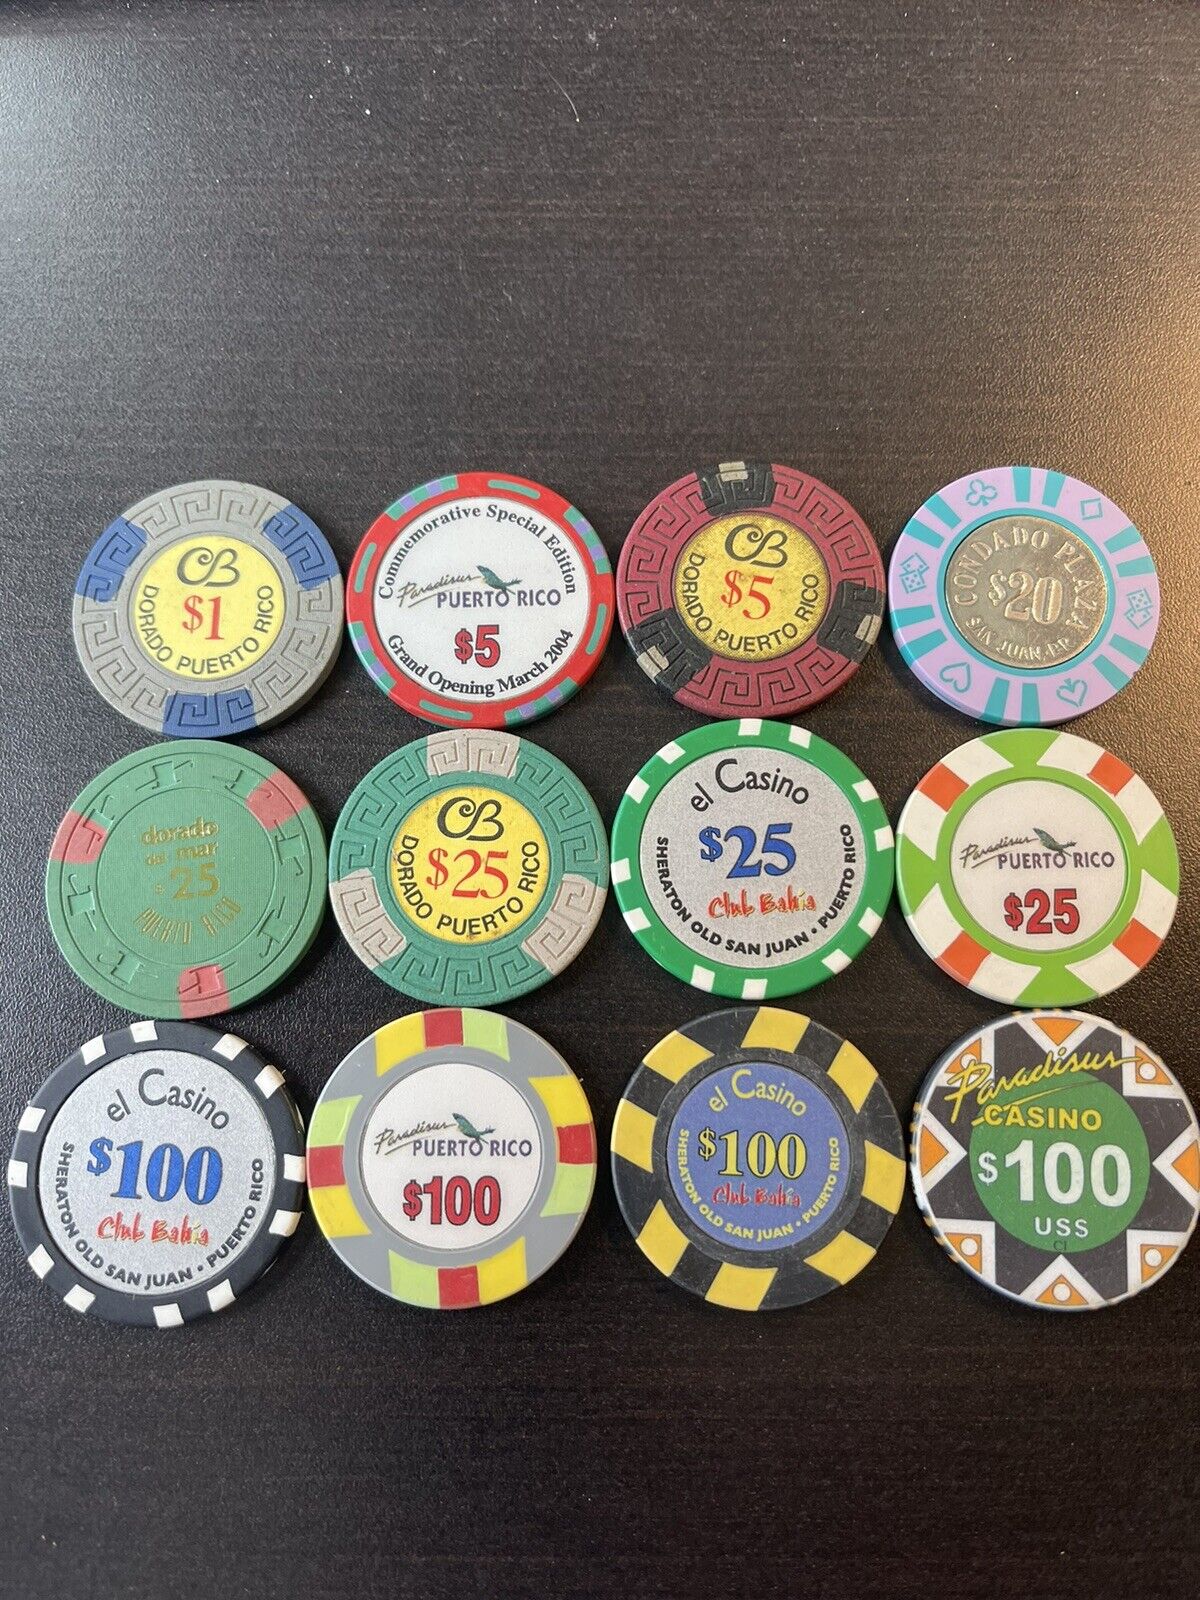 (12) Puerto Rico Casino Chips Vintage Chips $1 $5 $20 $25 $100 Wow